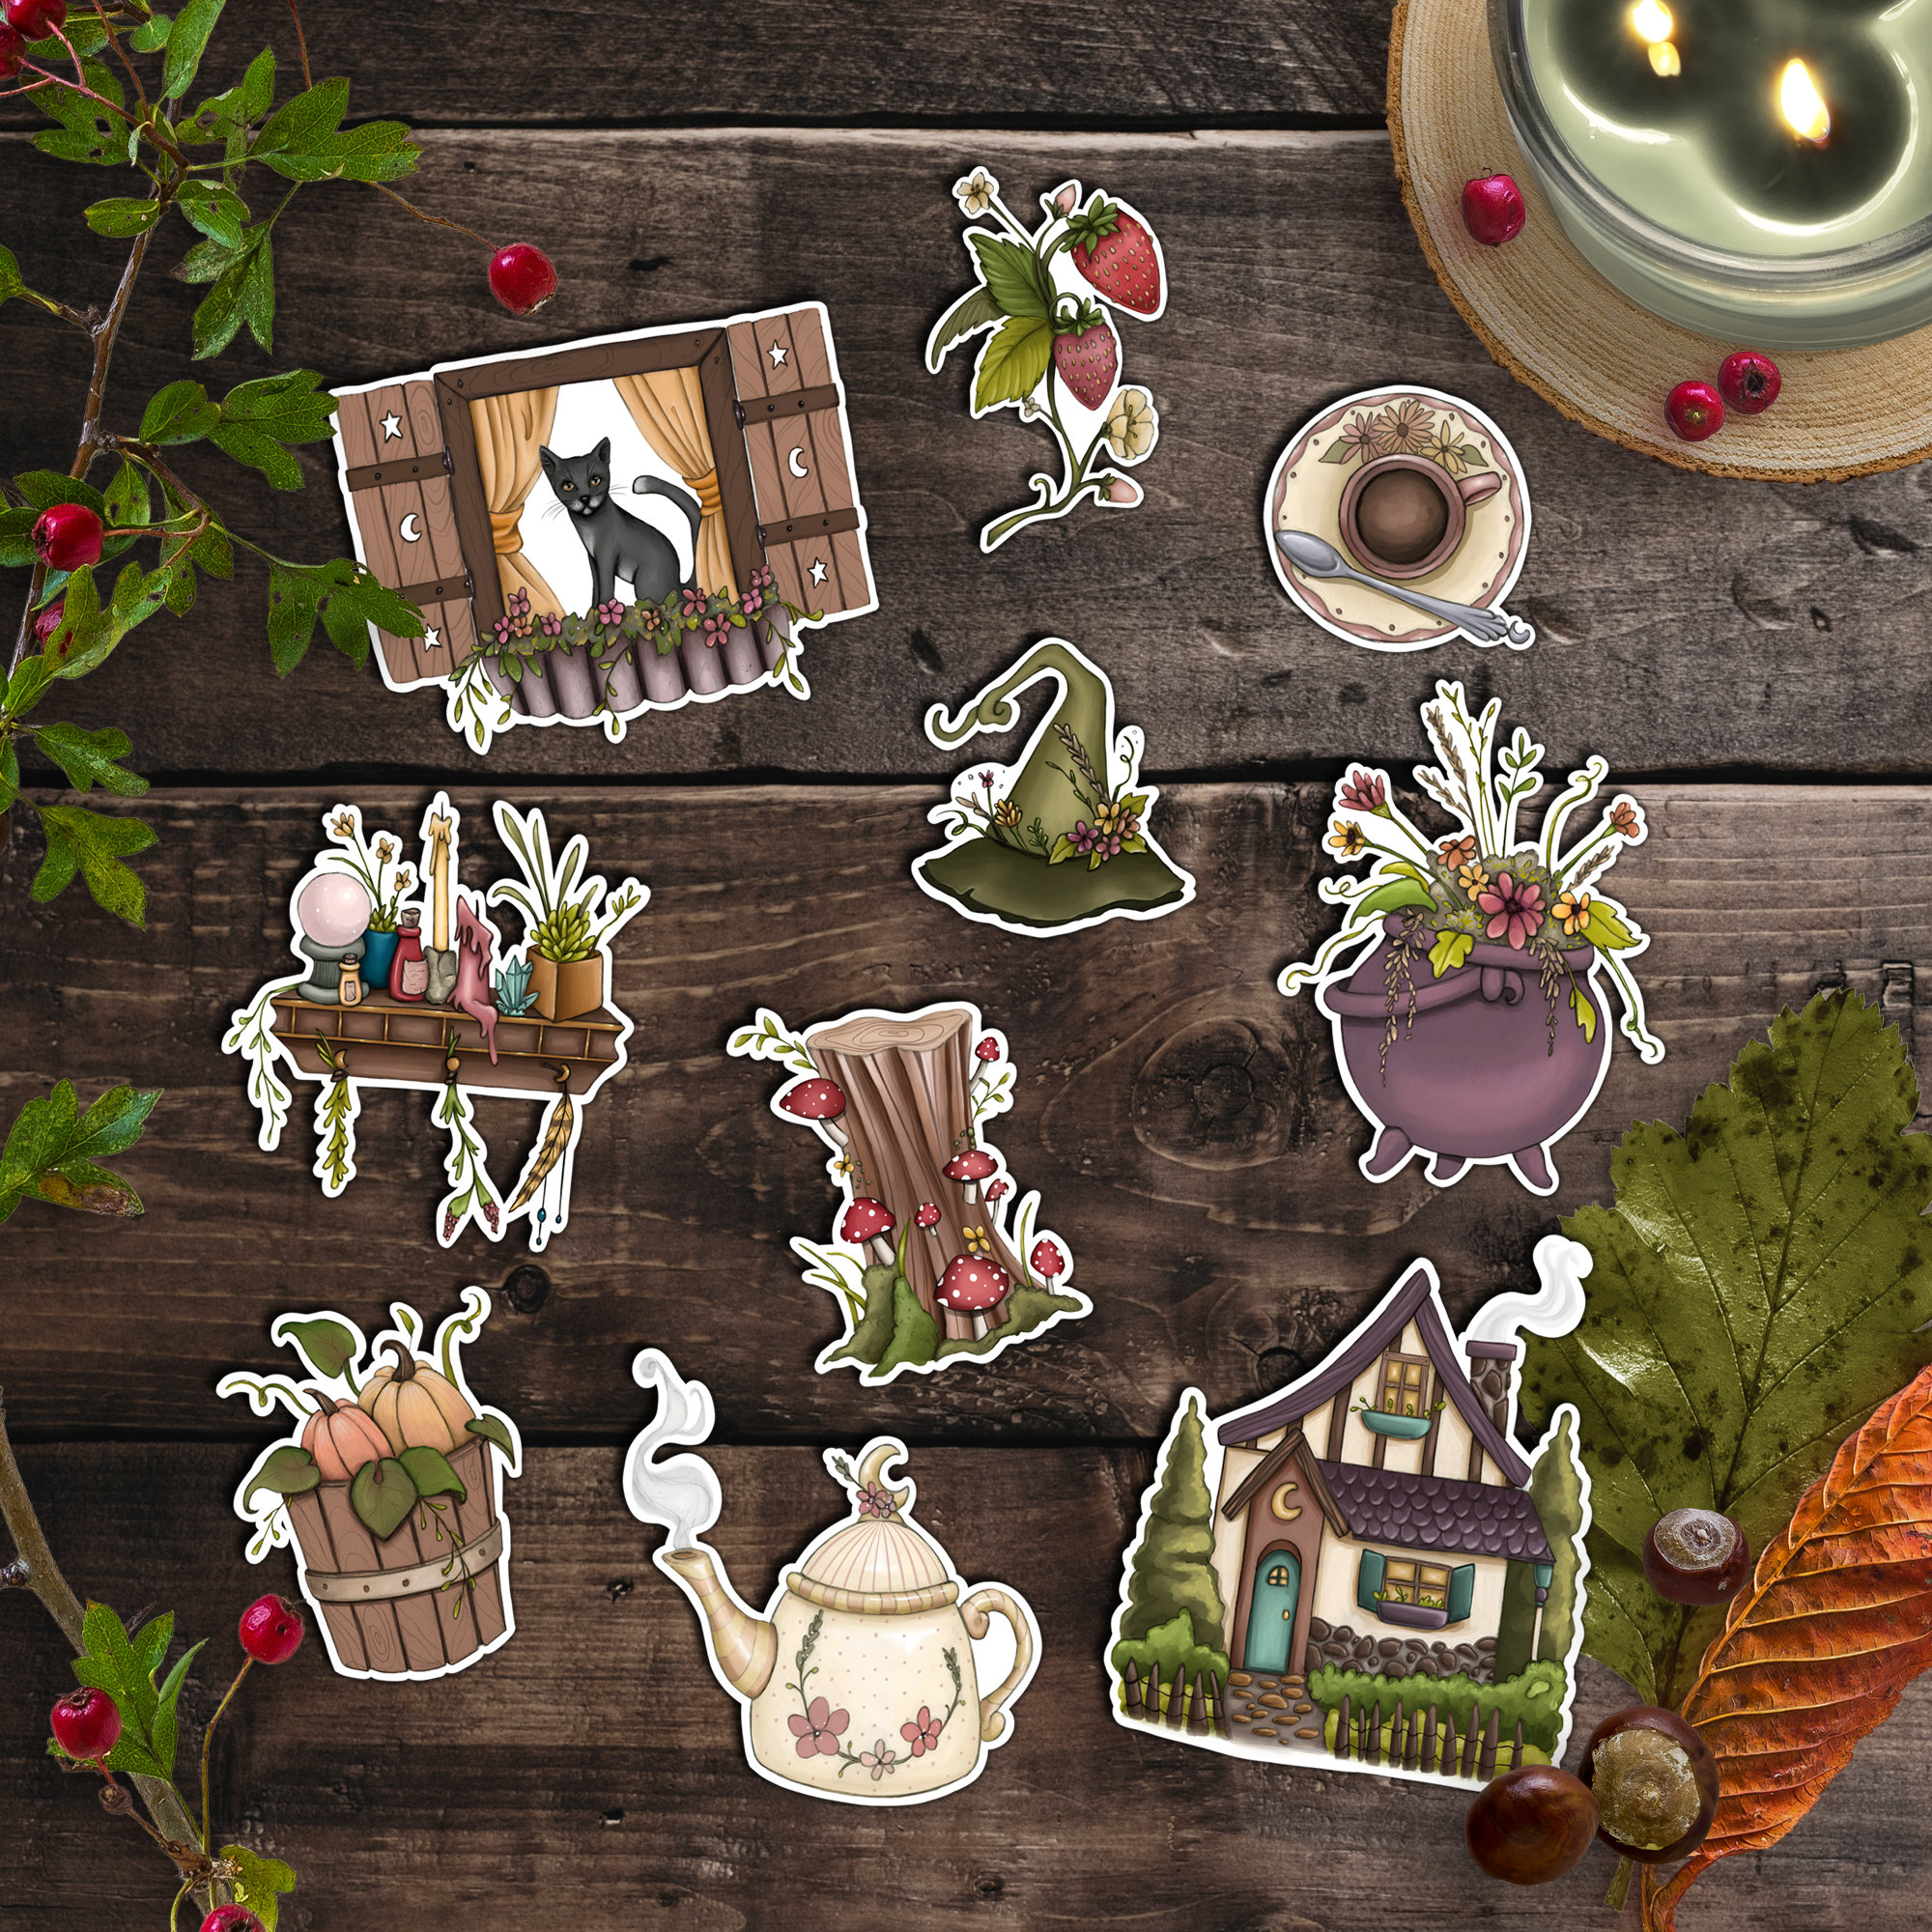 Cottage Witch Sticker Set - Cottagecore Aesthetic - Includes 10 Stickers -  Journal Stickers | Planner Stickers | Scrapbooking Supply